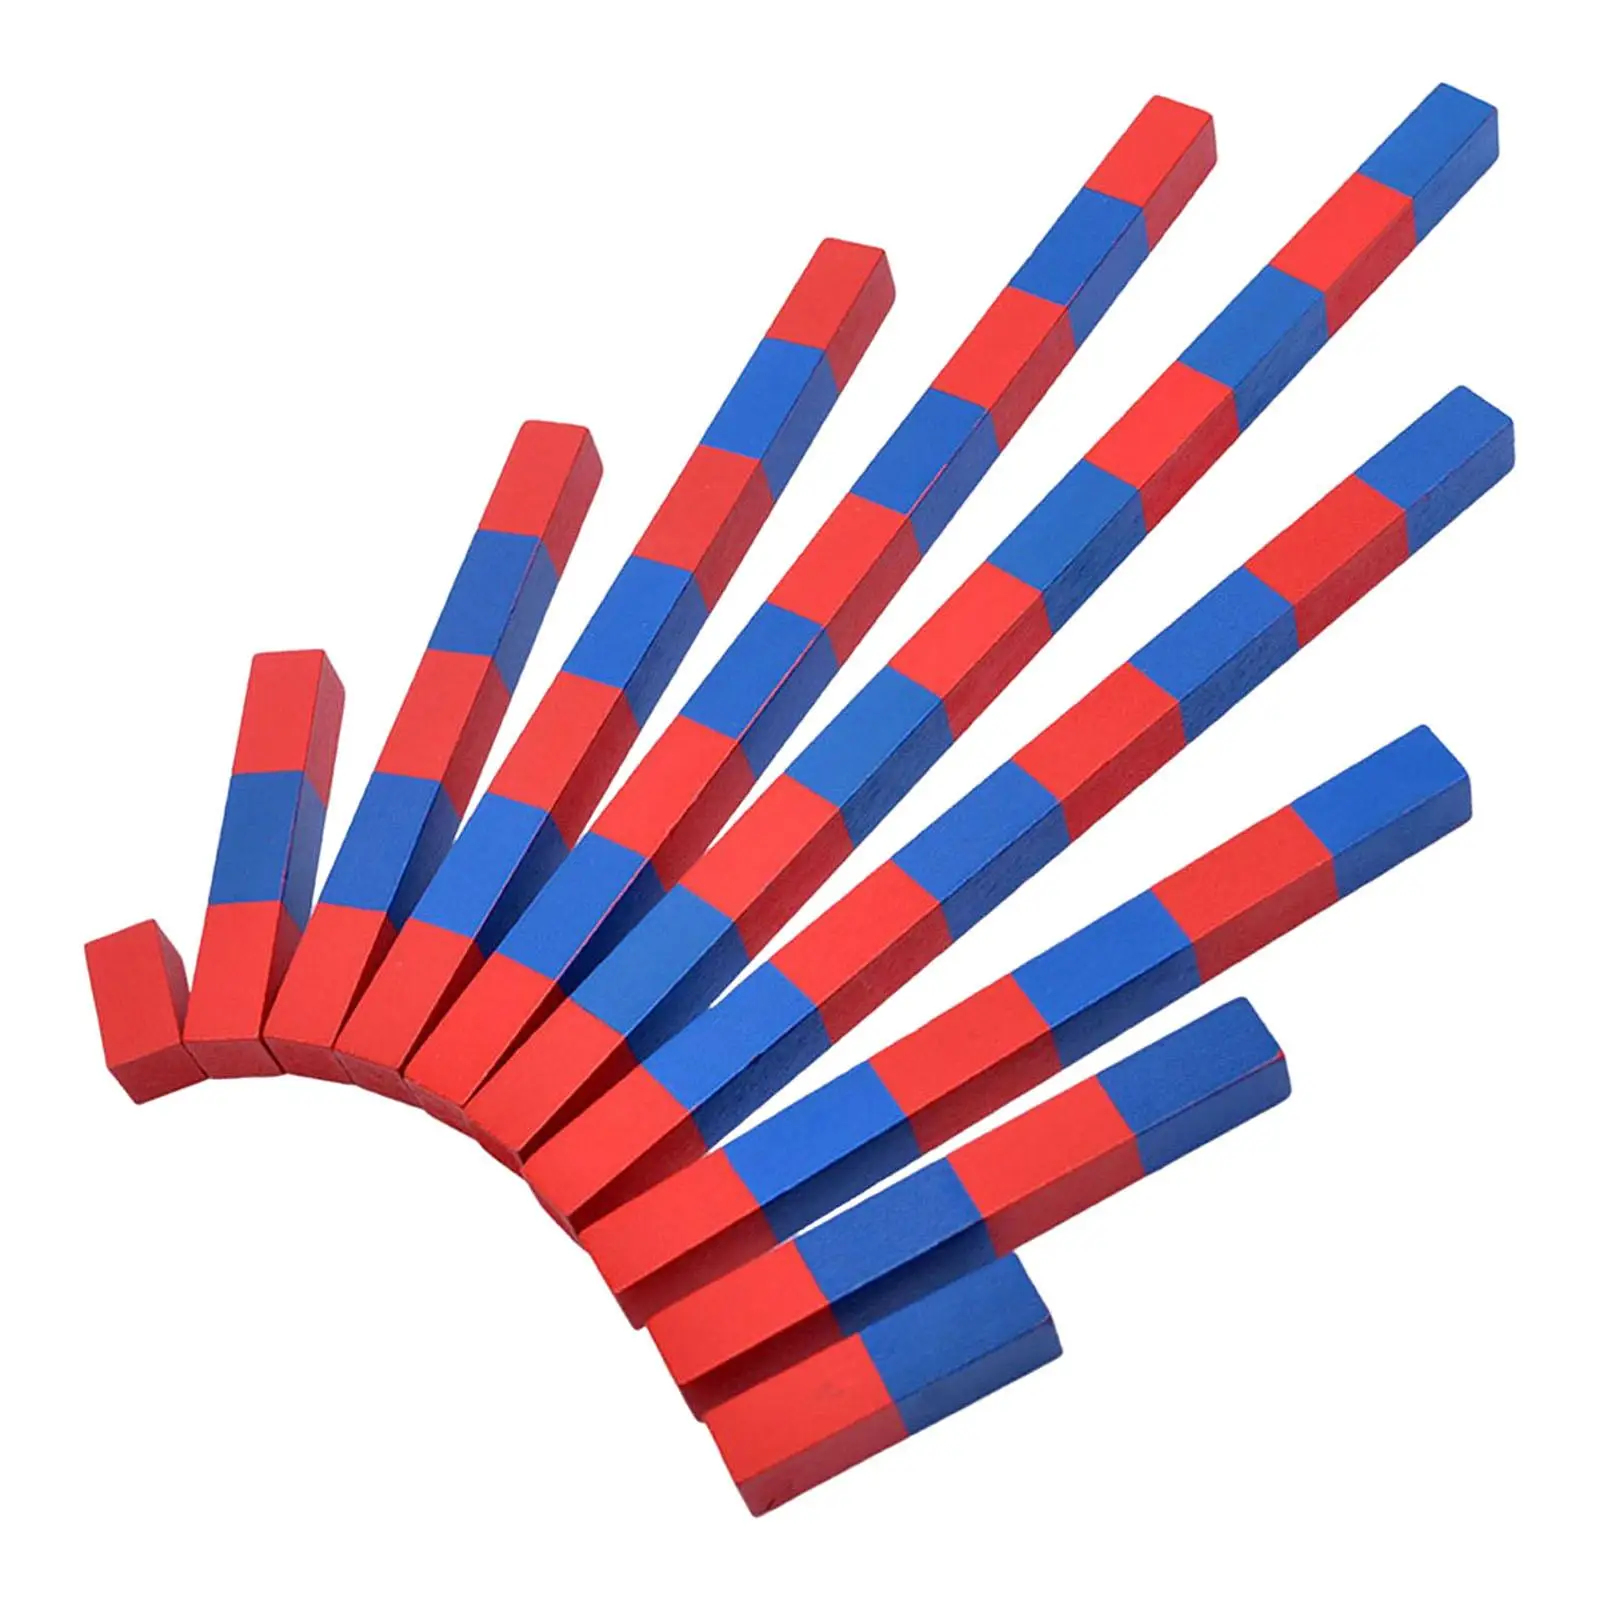 Wooden Montessori Red Blue Number Rods Counting Rods Number Match Puzzle Learning Bars Early Childhood for Learning Activities